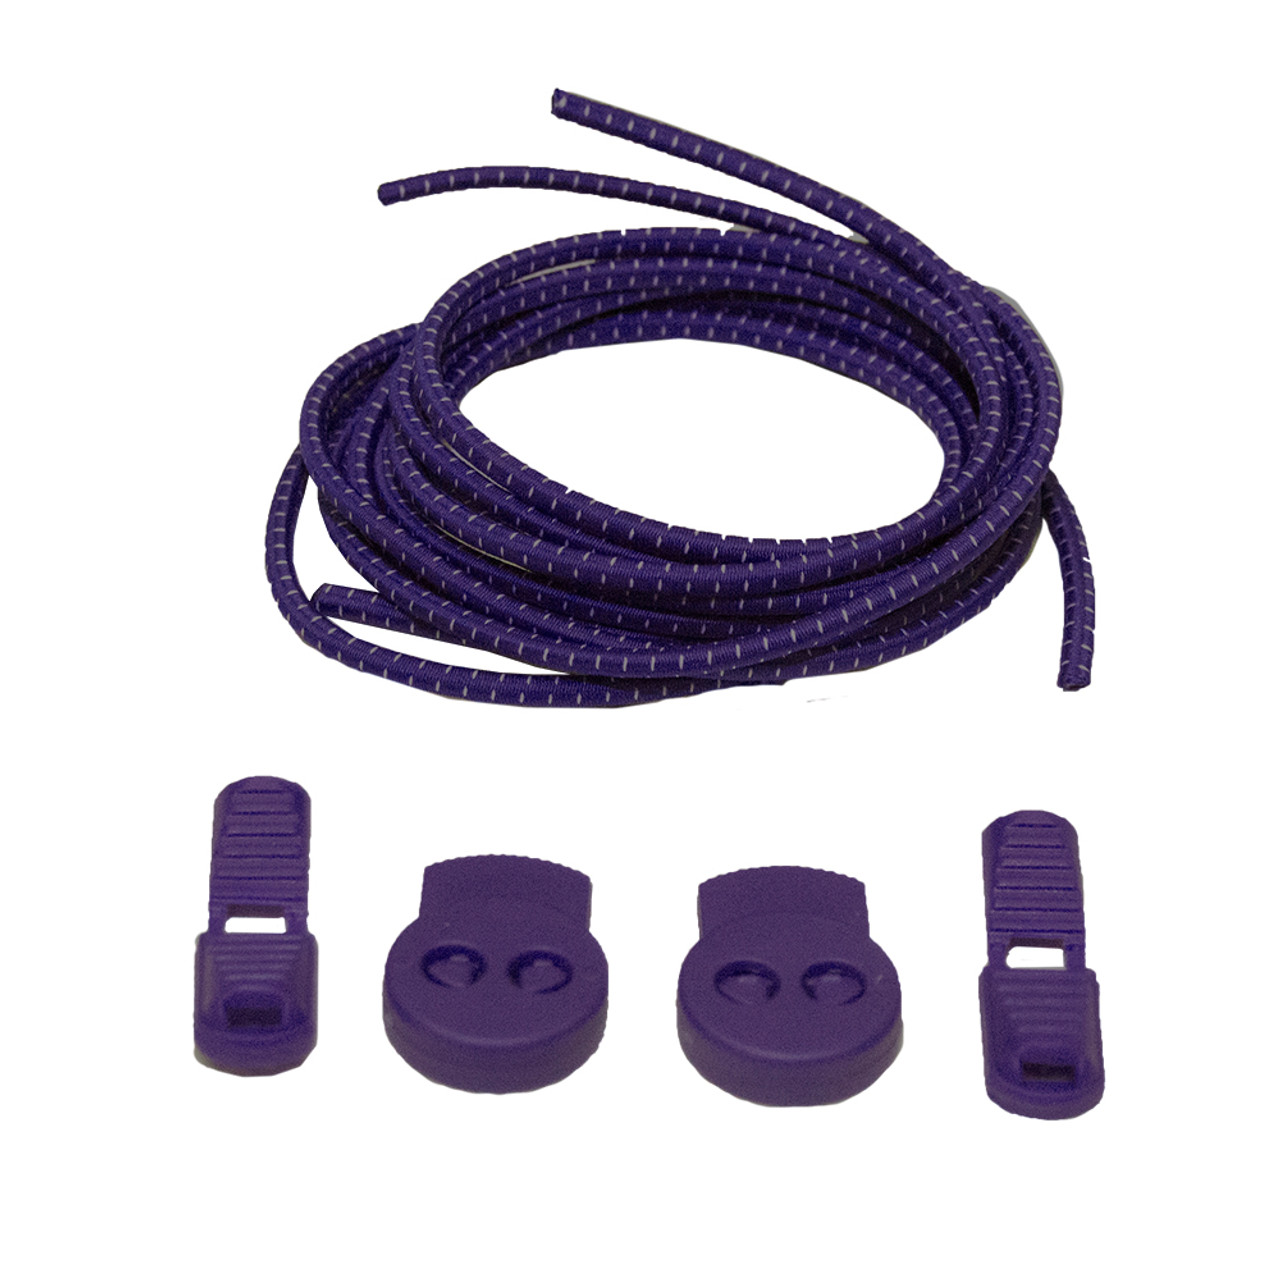 Stretch Elastic Shoelaces with Tension Locking Clips